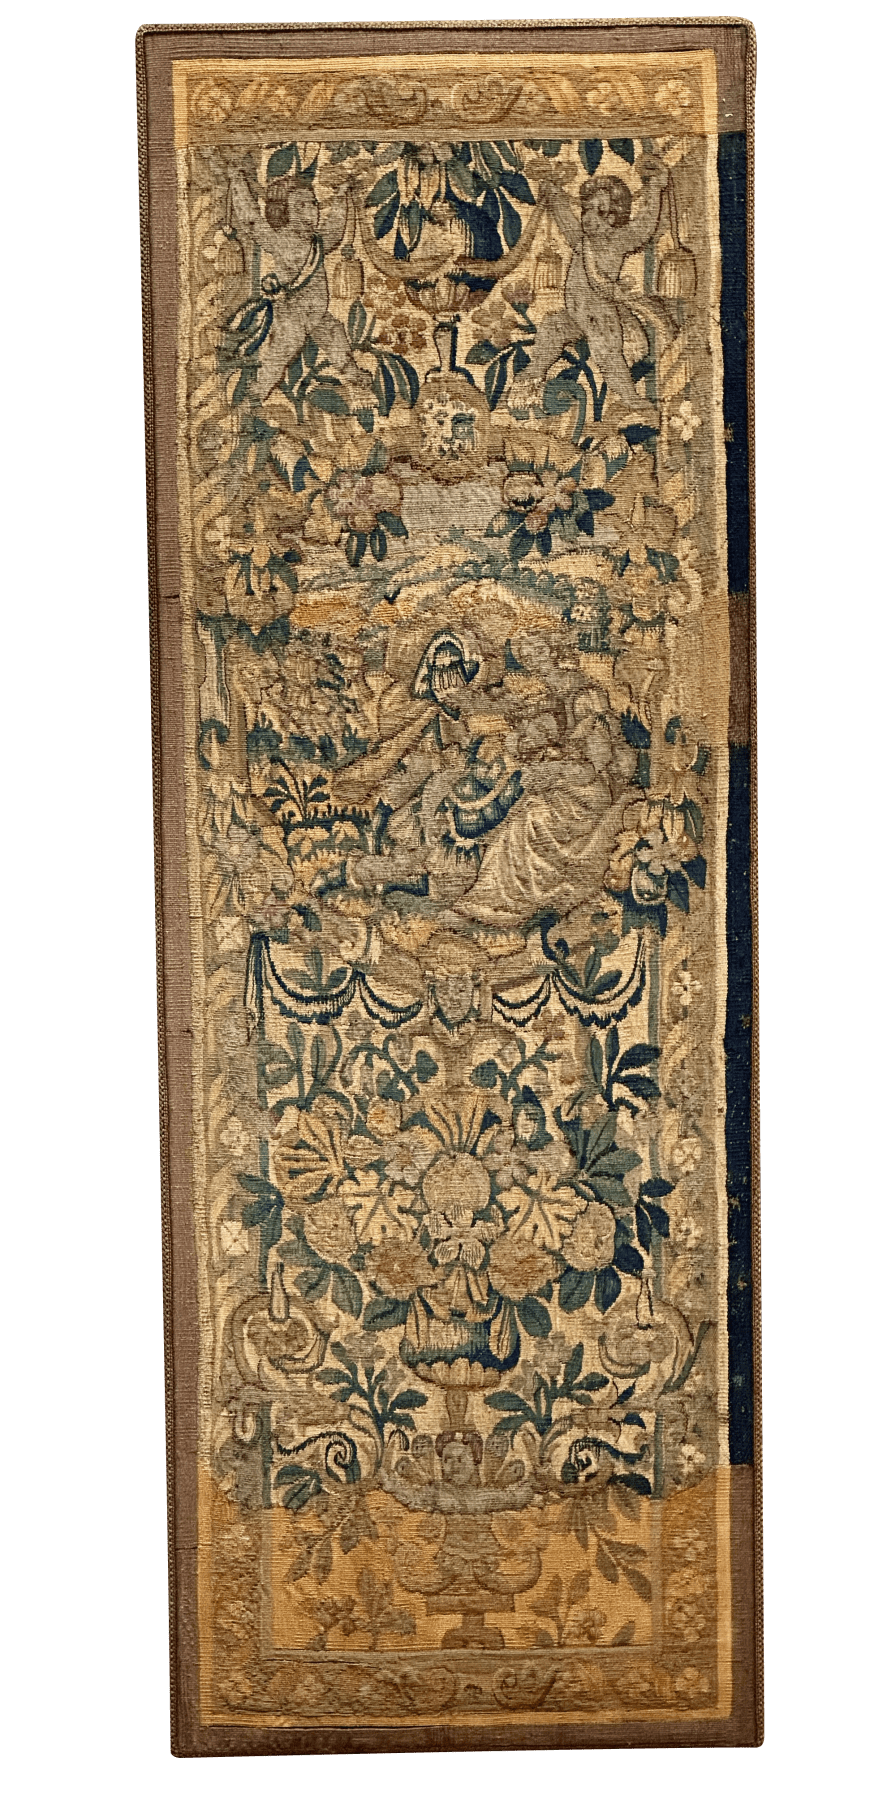 17th Century Flemish Tapestry Panel, mounted